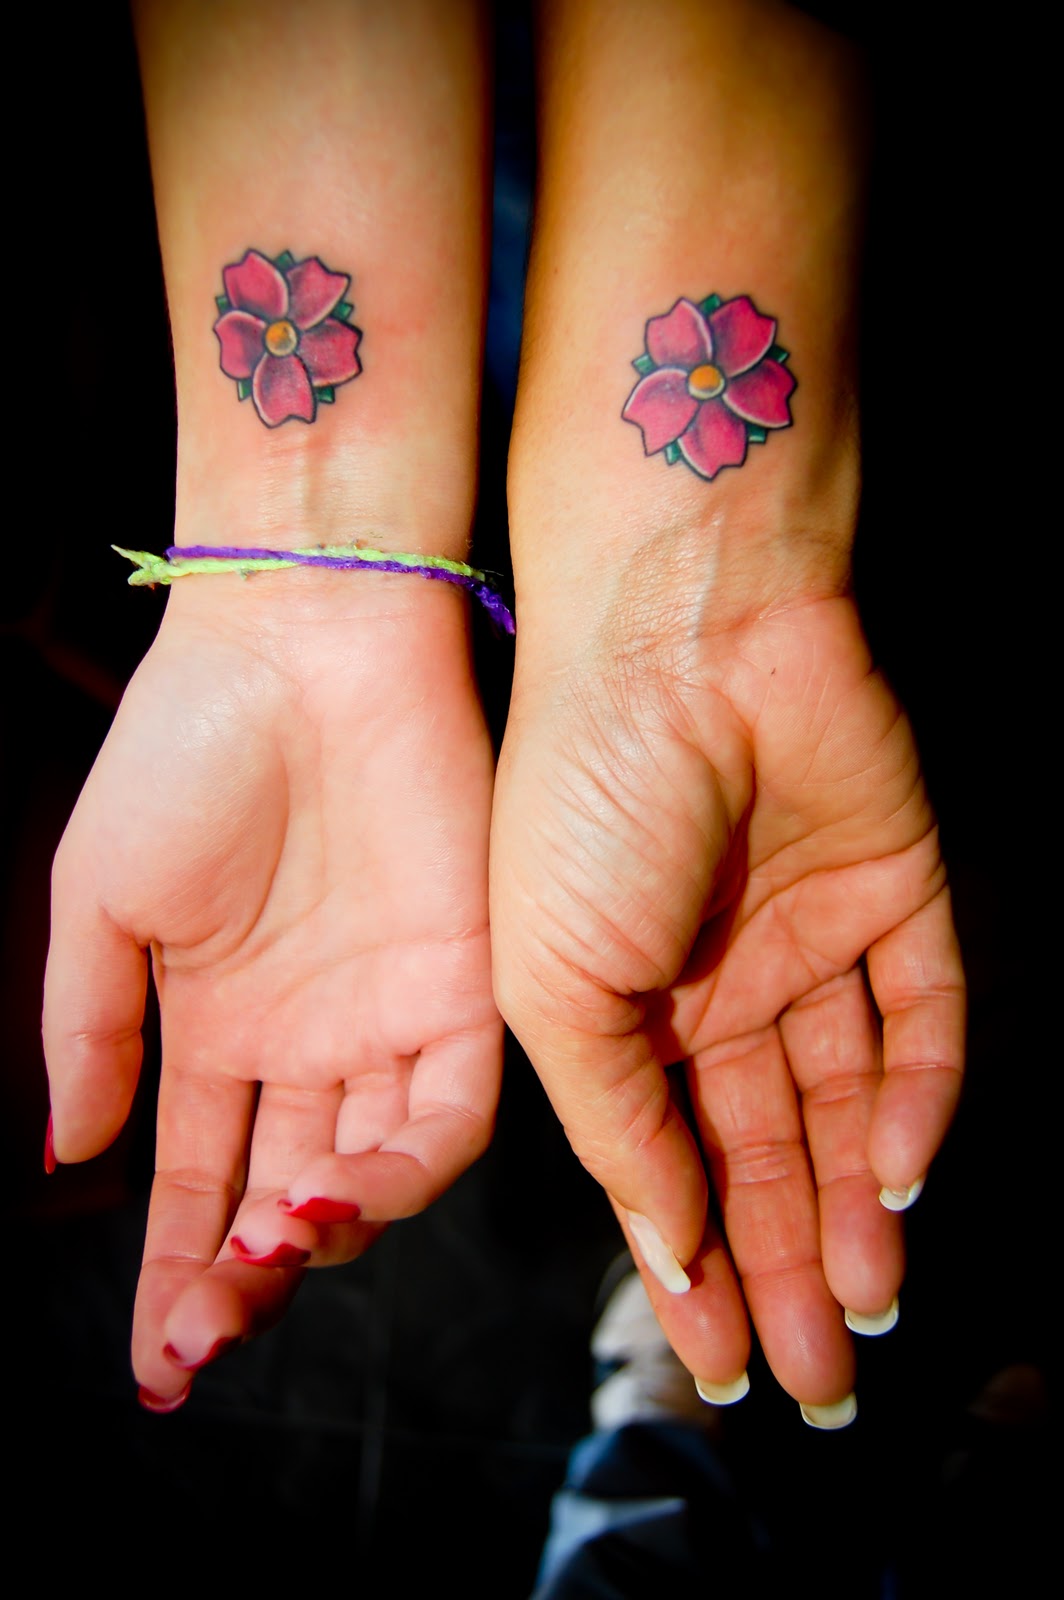 Tattoos of Chinese characters meaning Love, Friendship and Health - Stock  Photo - Dissolve